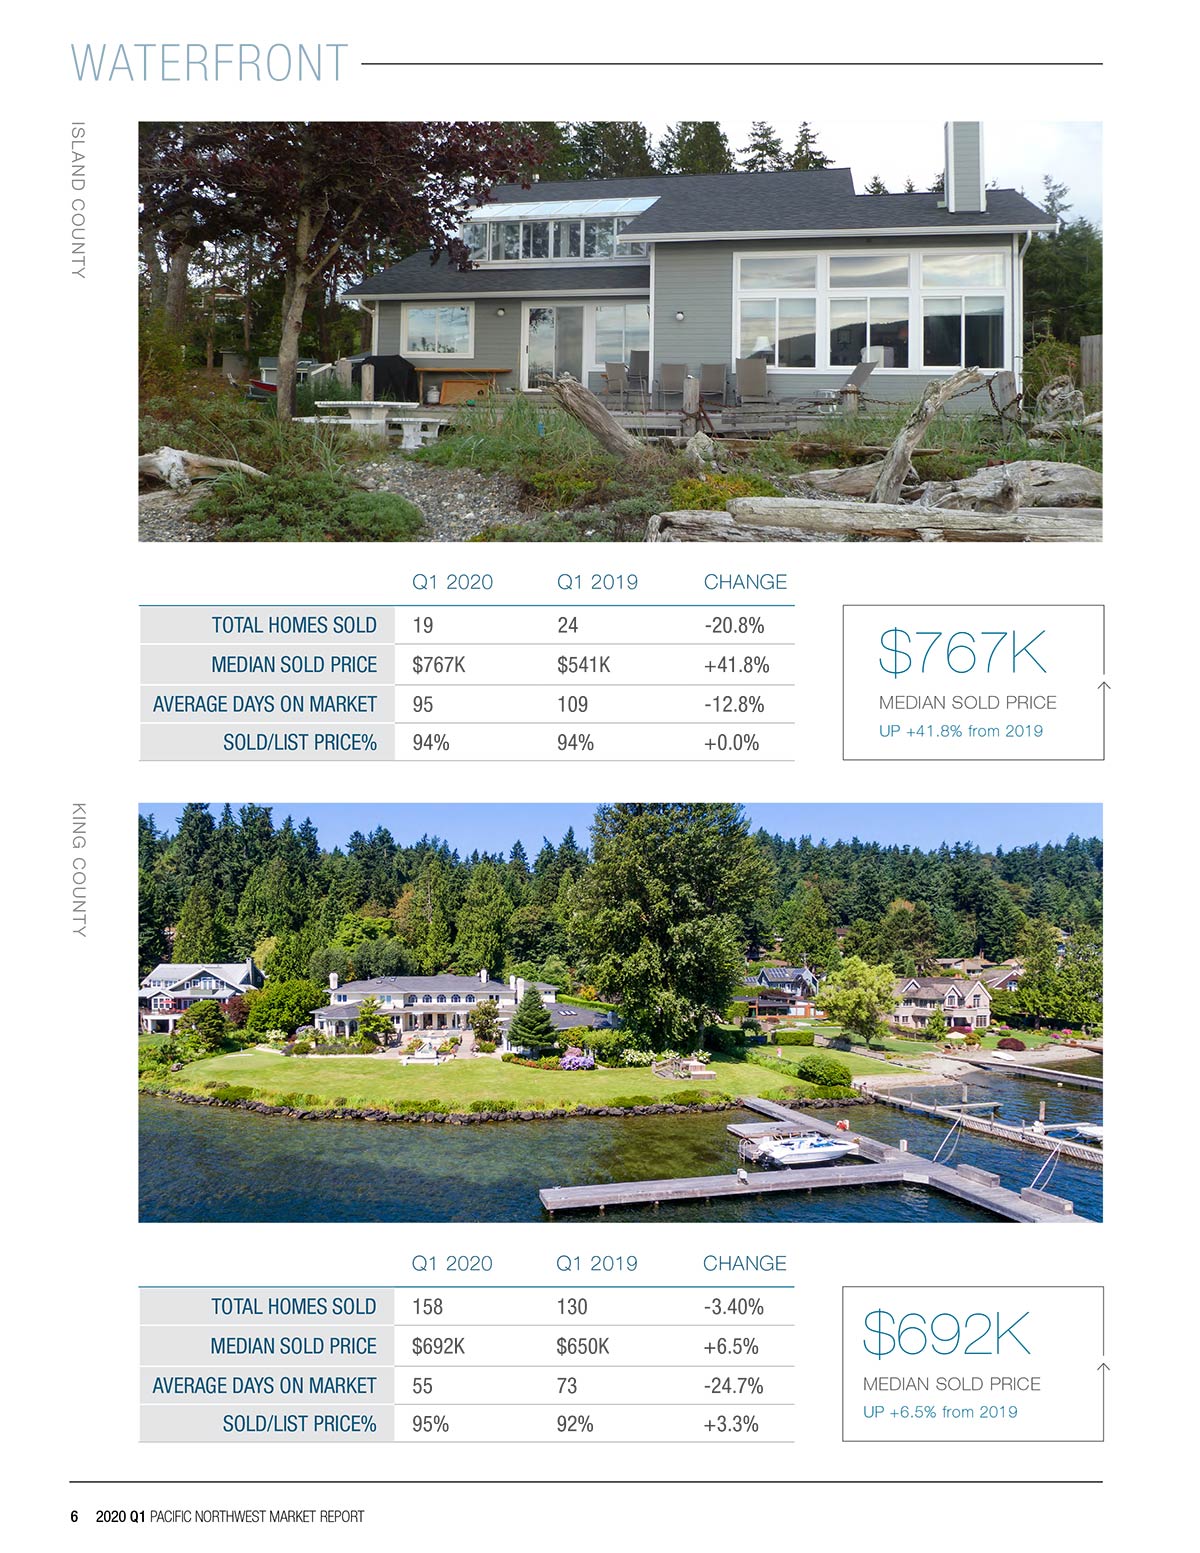 2020 First Quarter Waterfront Market Report